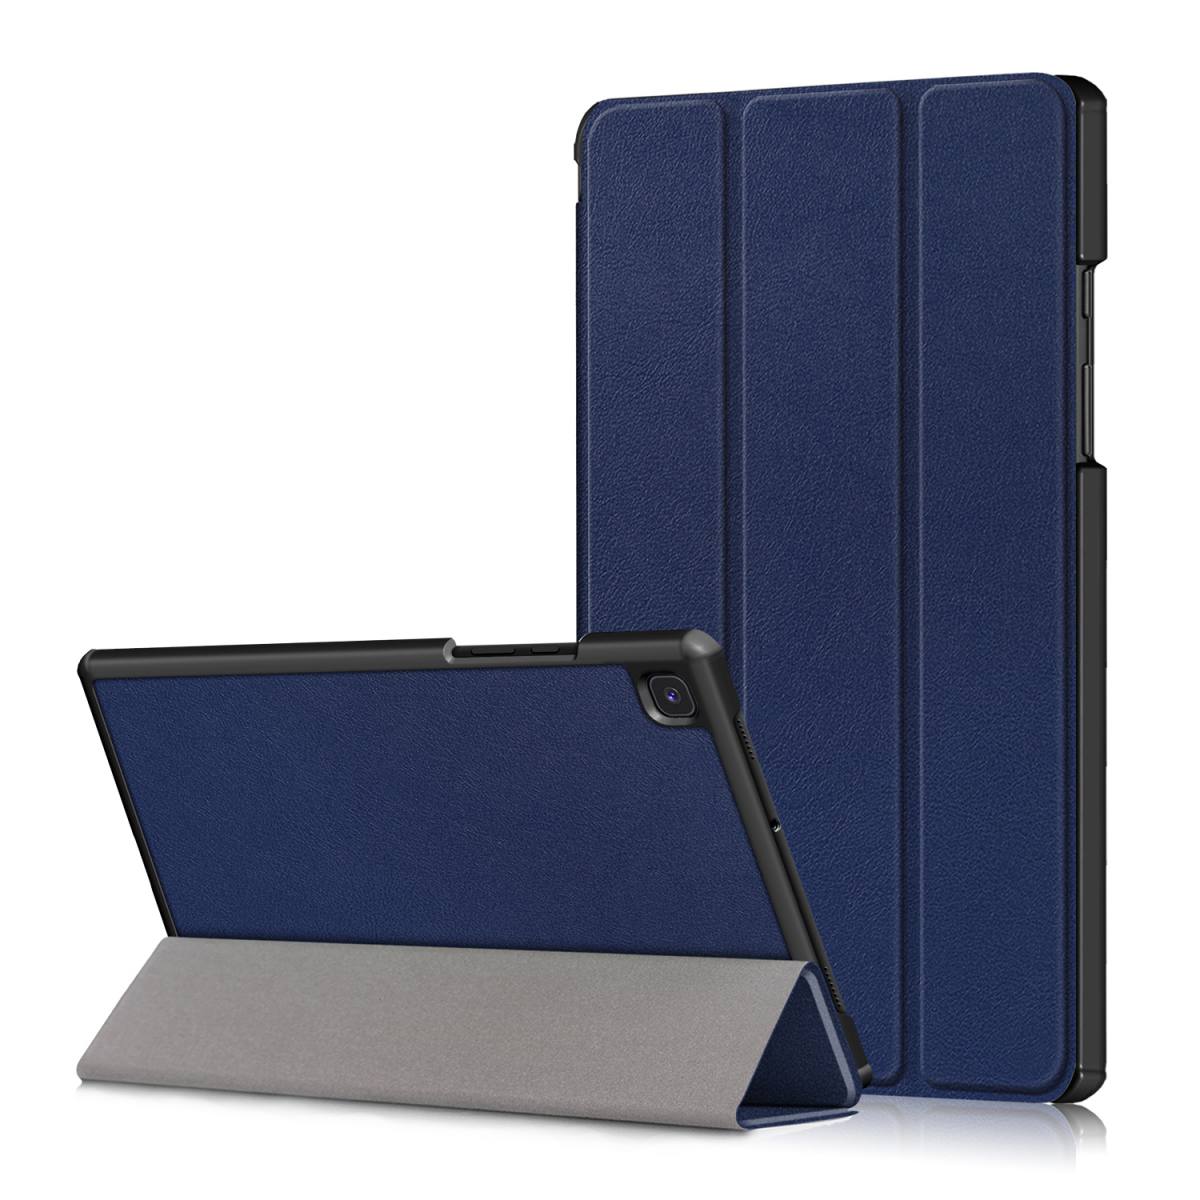 Чехол IT Baggage для Galaxy Tab A7 10.4 2020 T505/T500/T507 Blue ITSSA7104-4 2020 tablet case for samsung galaxy tab a7 10 4 smart sleep wake pu leather tri fold protective cover for sm t500 sm t505 t507